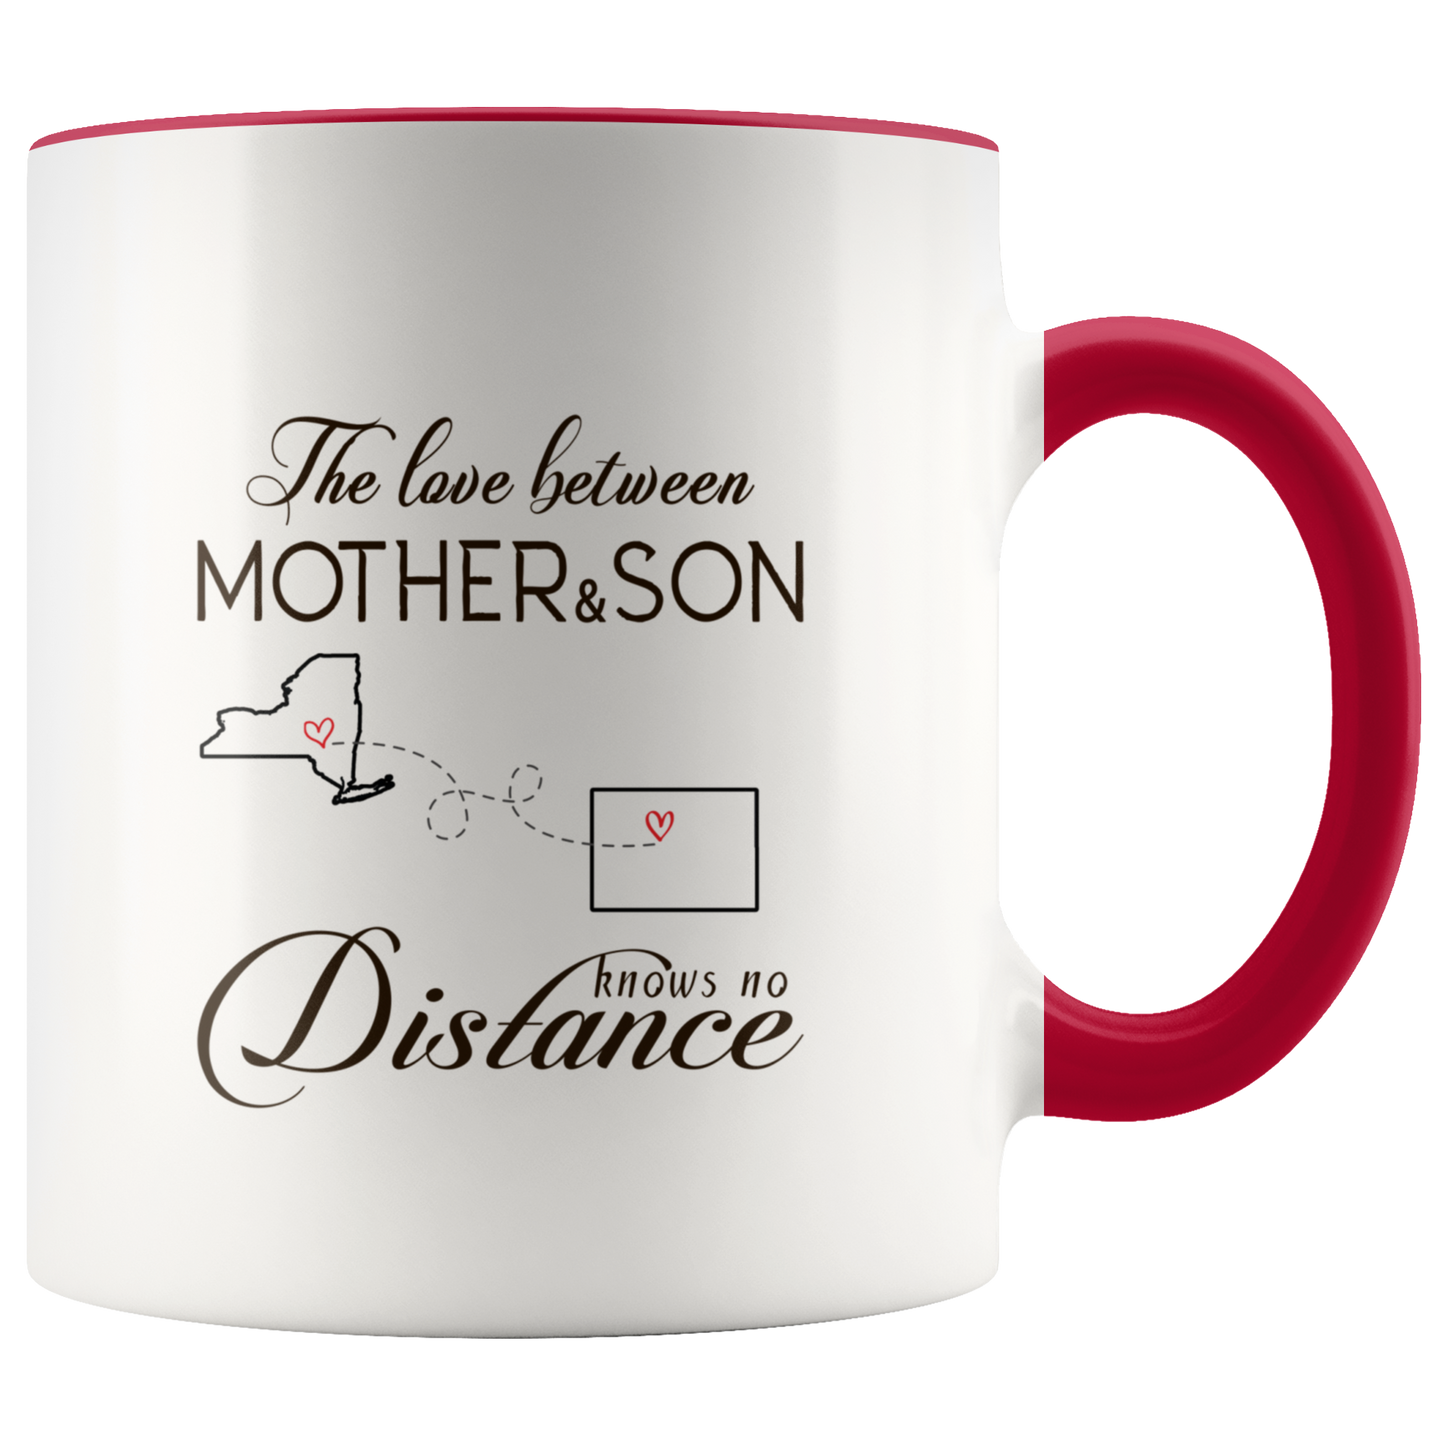 ND-21335628-sp-23697 - [ New York | Colorado ]Long Distance Accent Mug 11 oz Red - The Love Between Mother